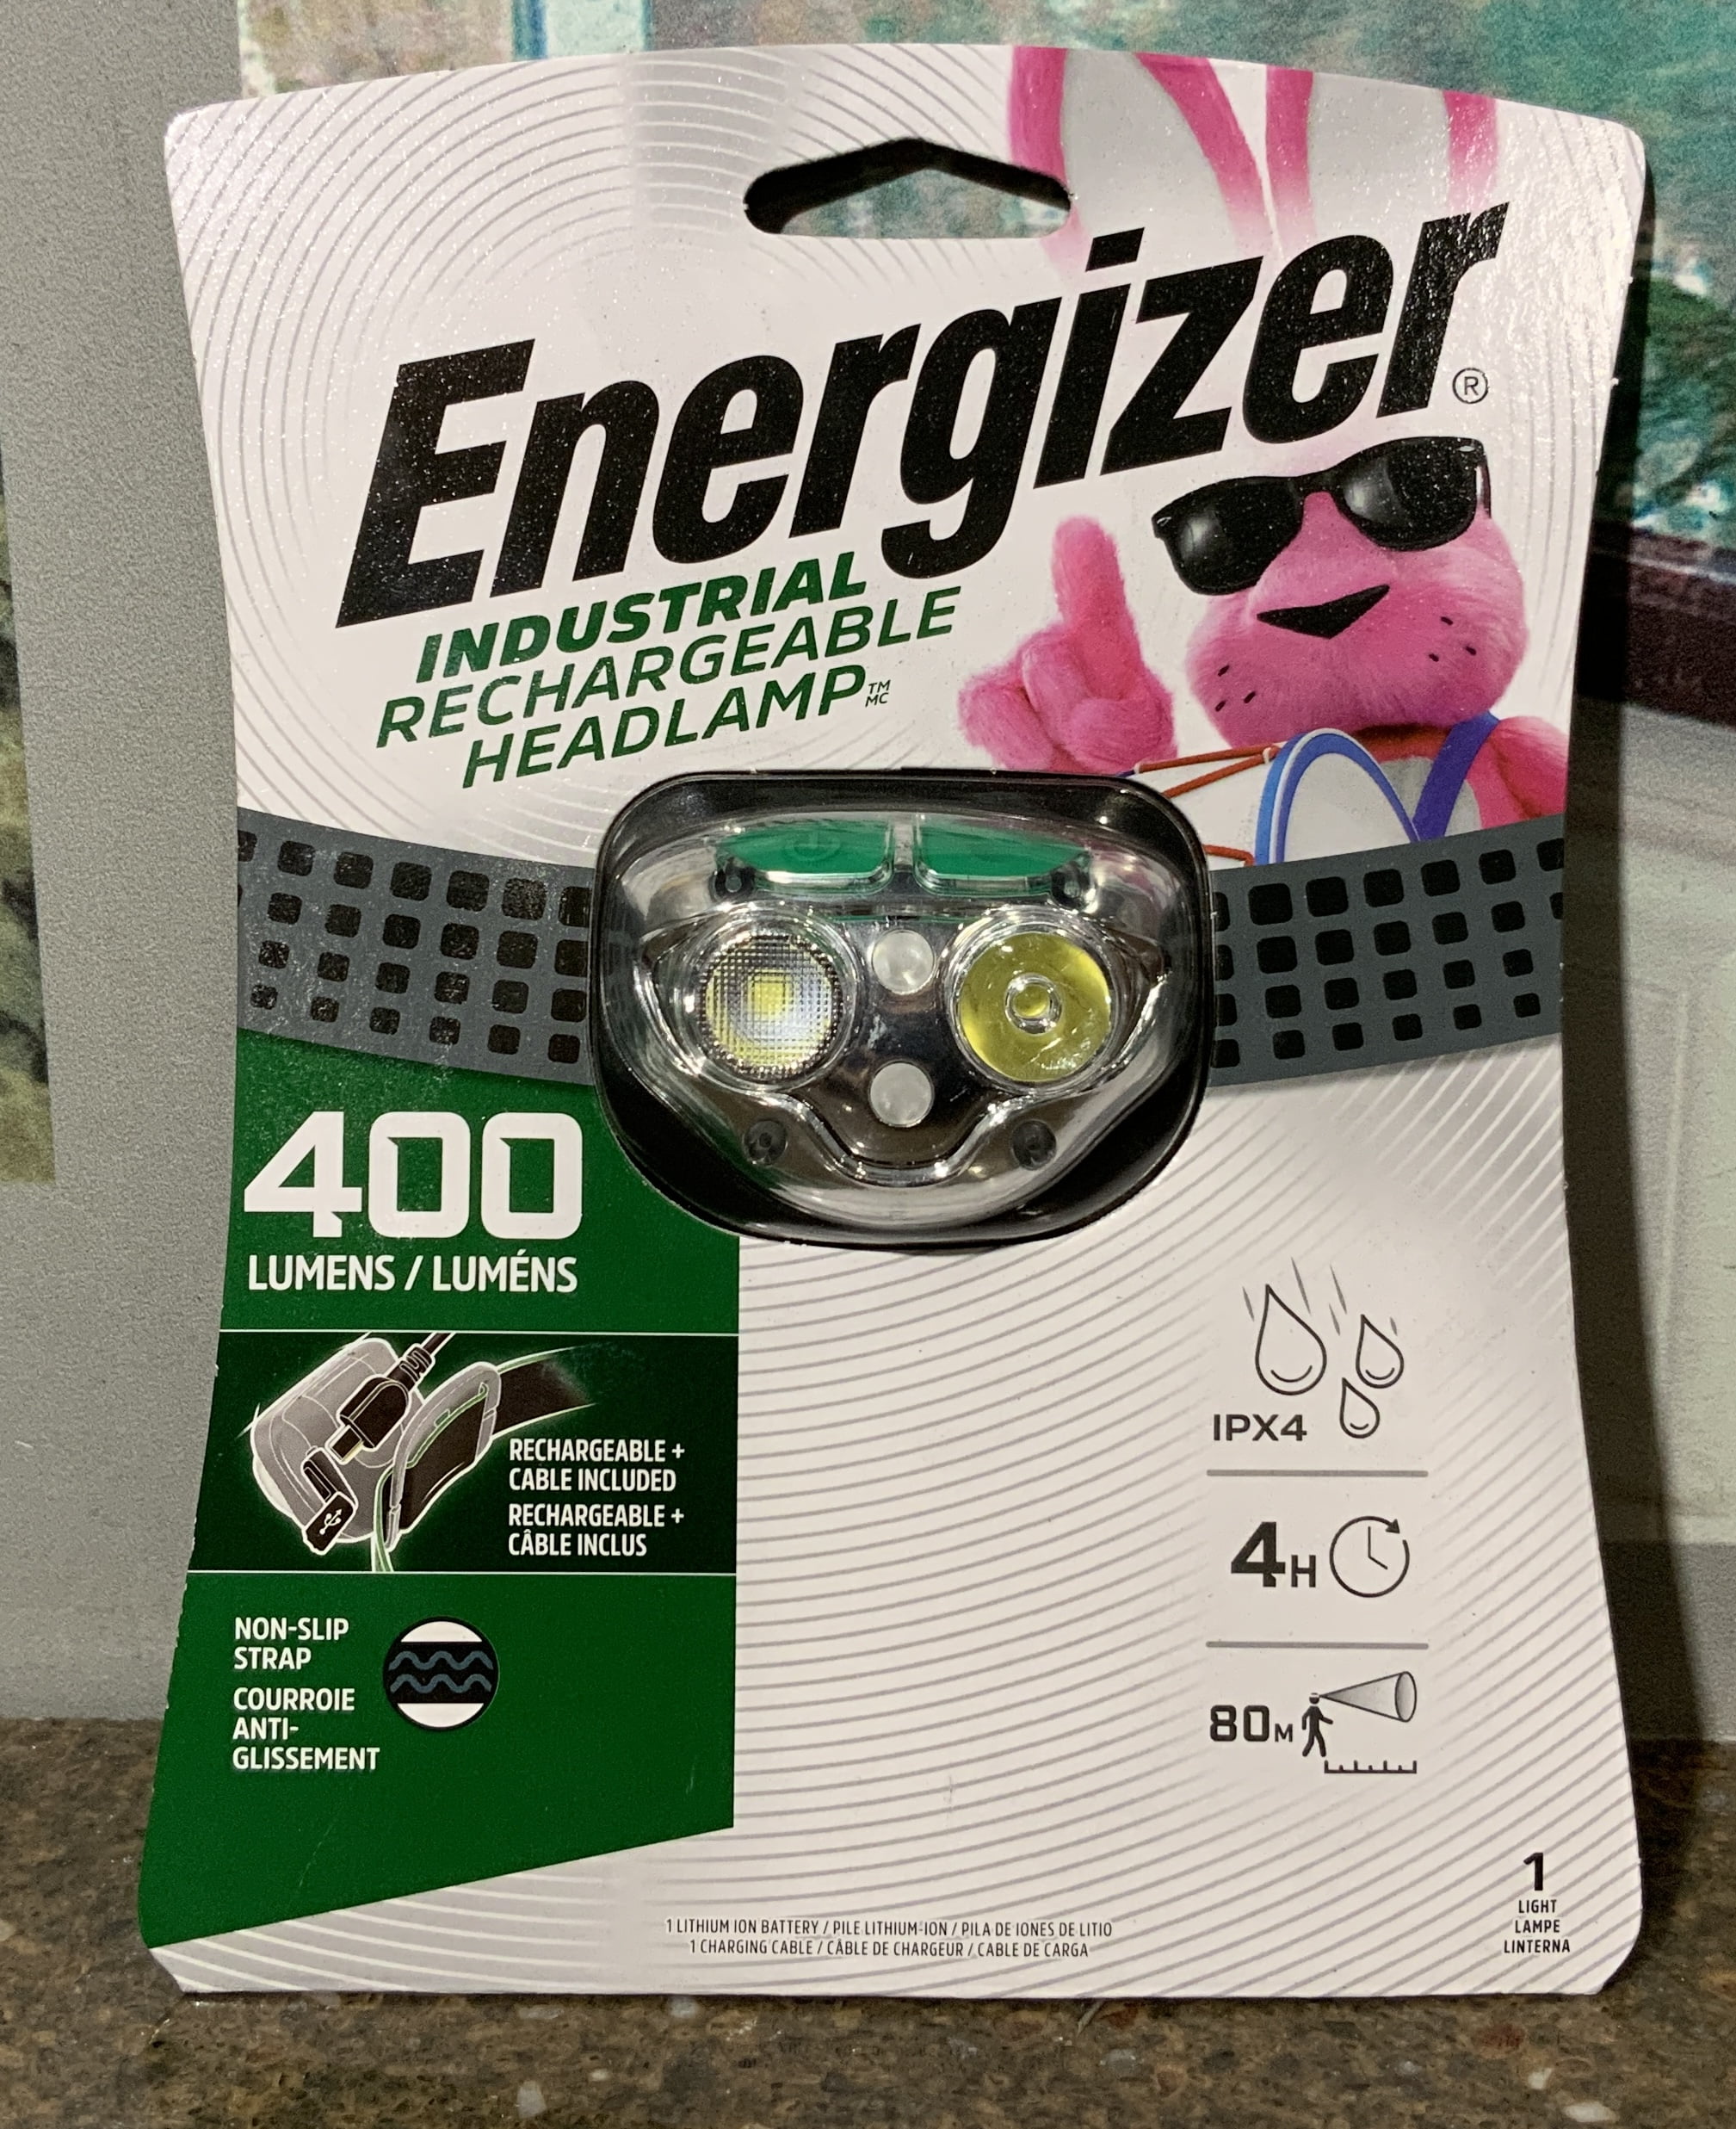 Energizer Industrial 400 Lumens Rechargeable Headlamp IPX4 80m Visibility 4  Hour